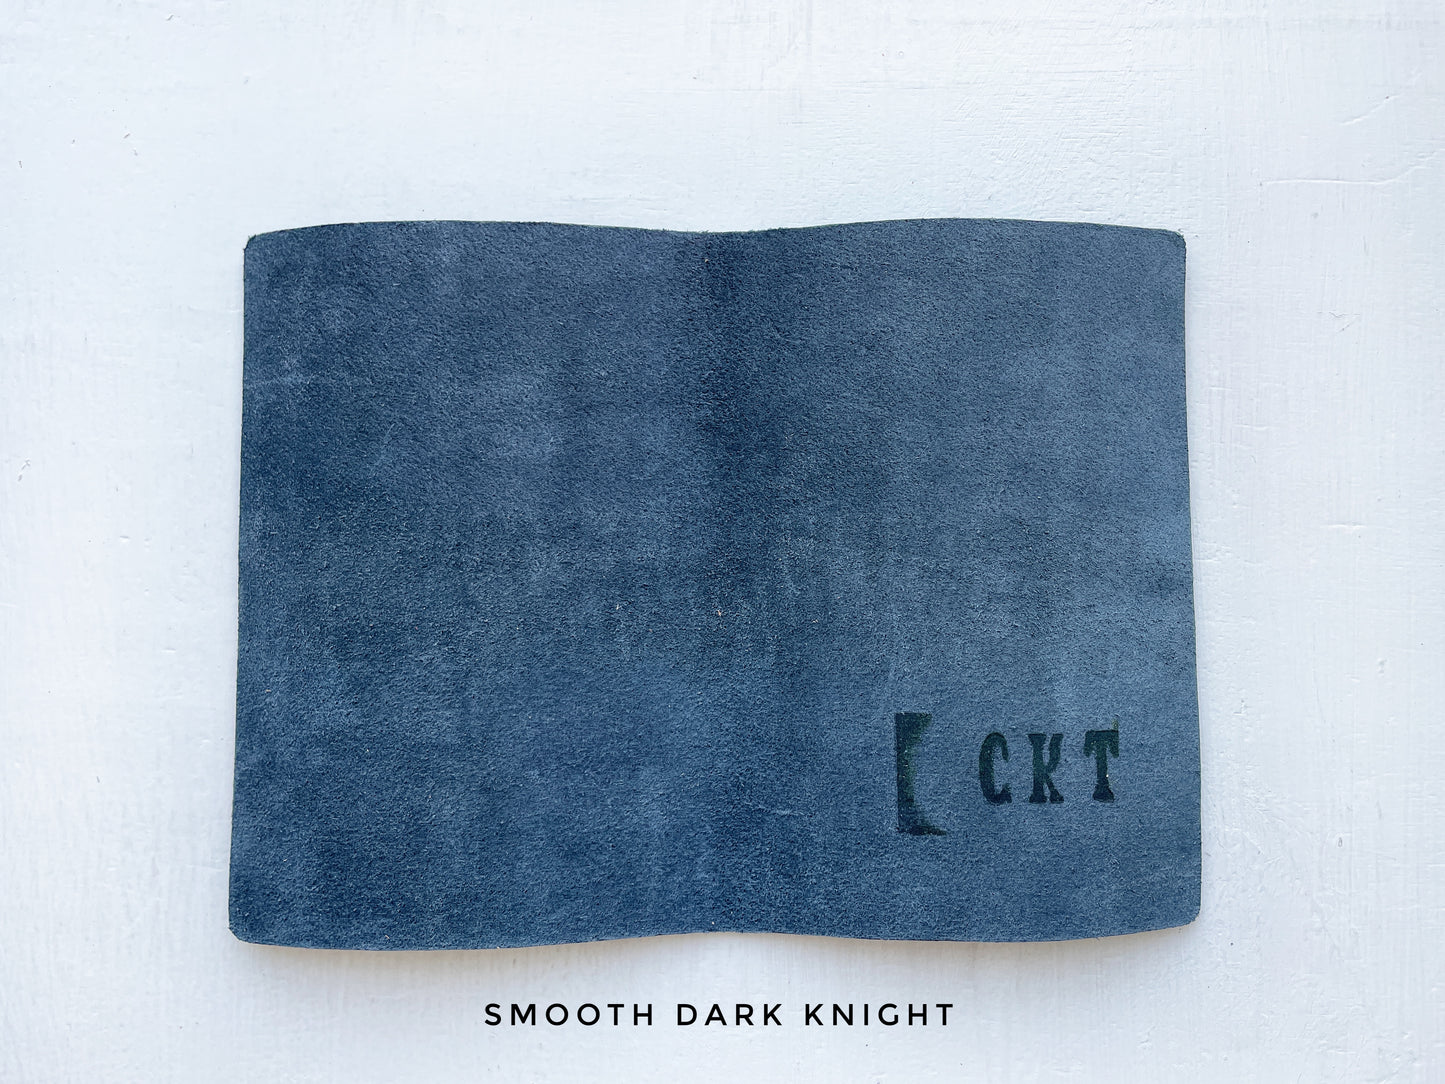 SMOOTH DARK KNIGHT LEATHER COVER